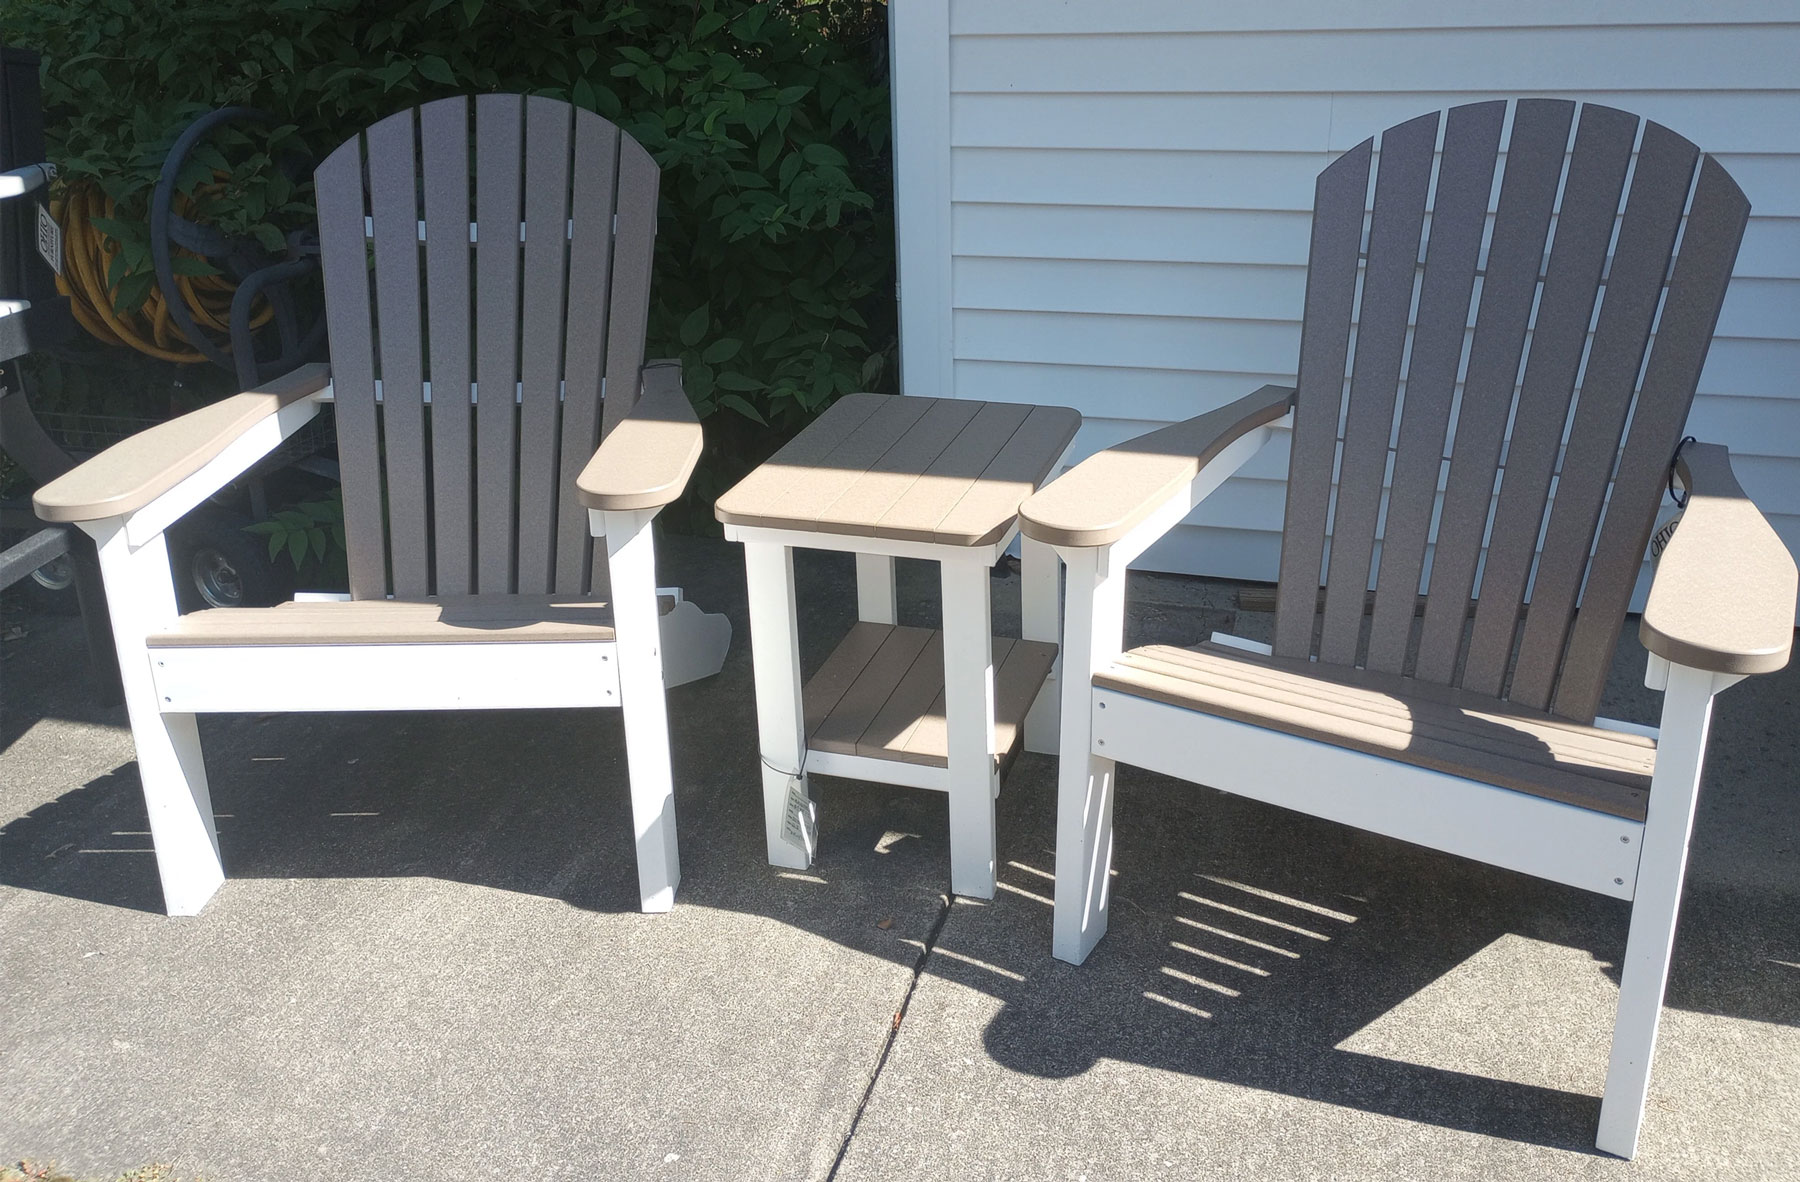 (2) Comfo-Back Adirondacks and (1) Rectangle End Table in Weatherwood on White